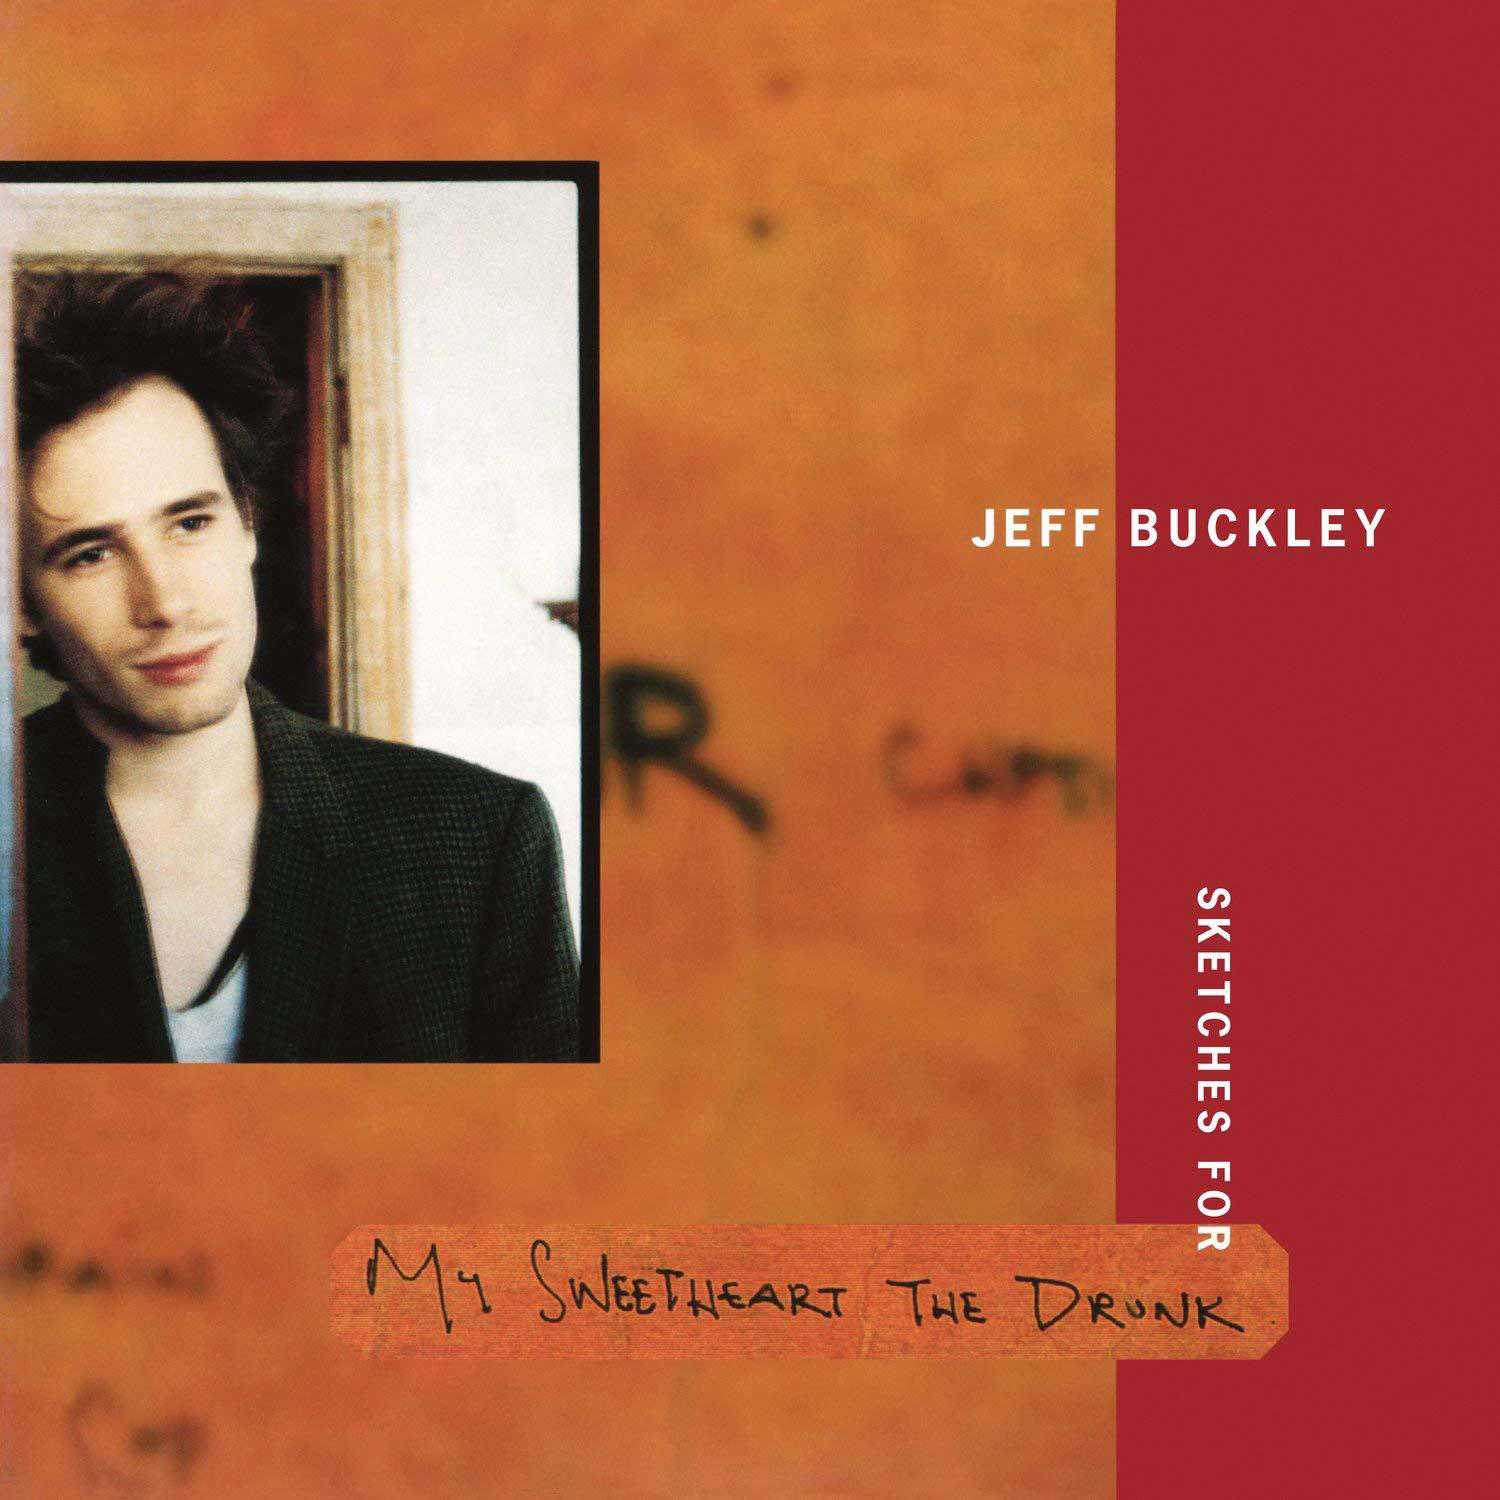 Jeff Buckley - - (Vinyl) Sweetheart Sketches My The for Drunk